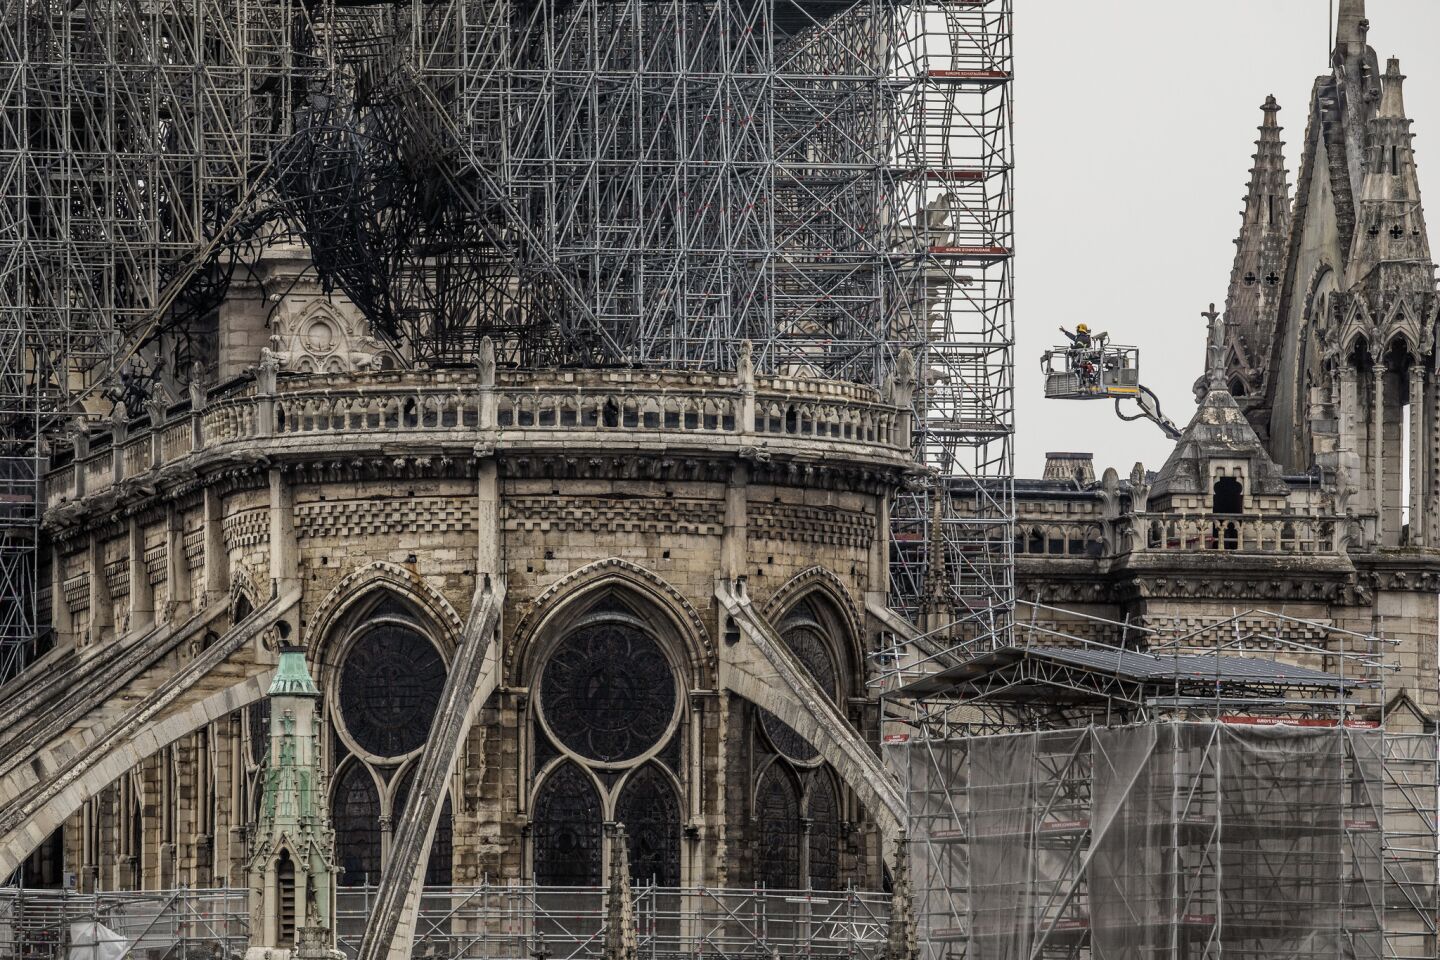 Workers inspect damage. The cathedral's flying buttresses are seen at left and in the foreground. The slanted supports were invented at the cathedral to provide support to an "exceptionally tall structure," says USC history professor Carolyn M. Malone.